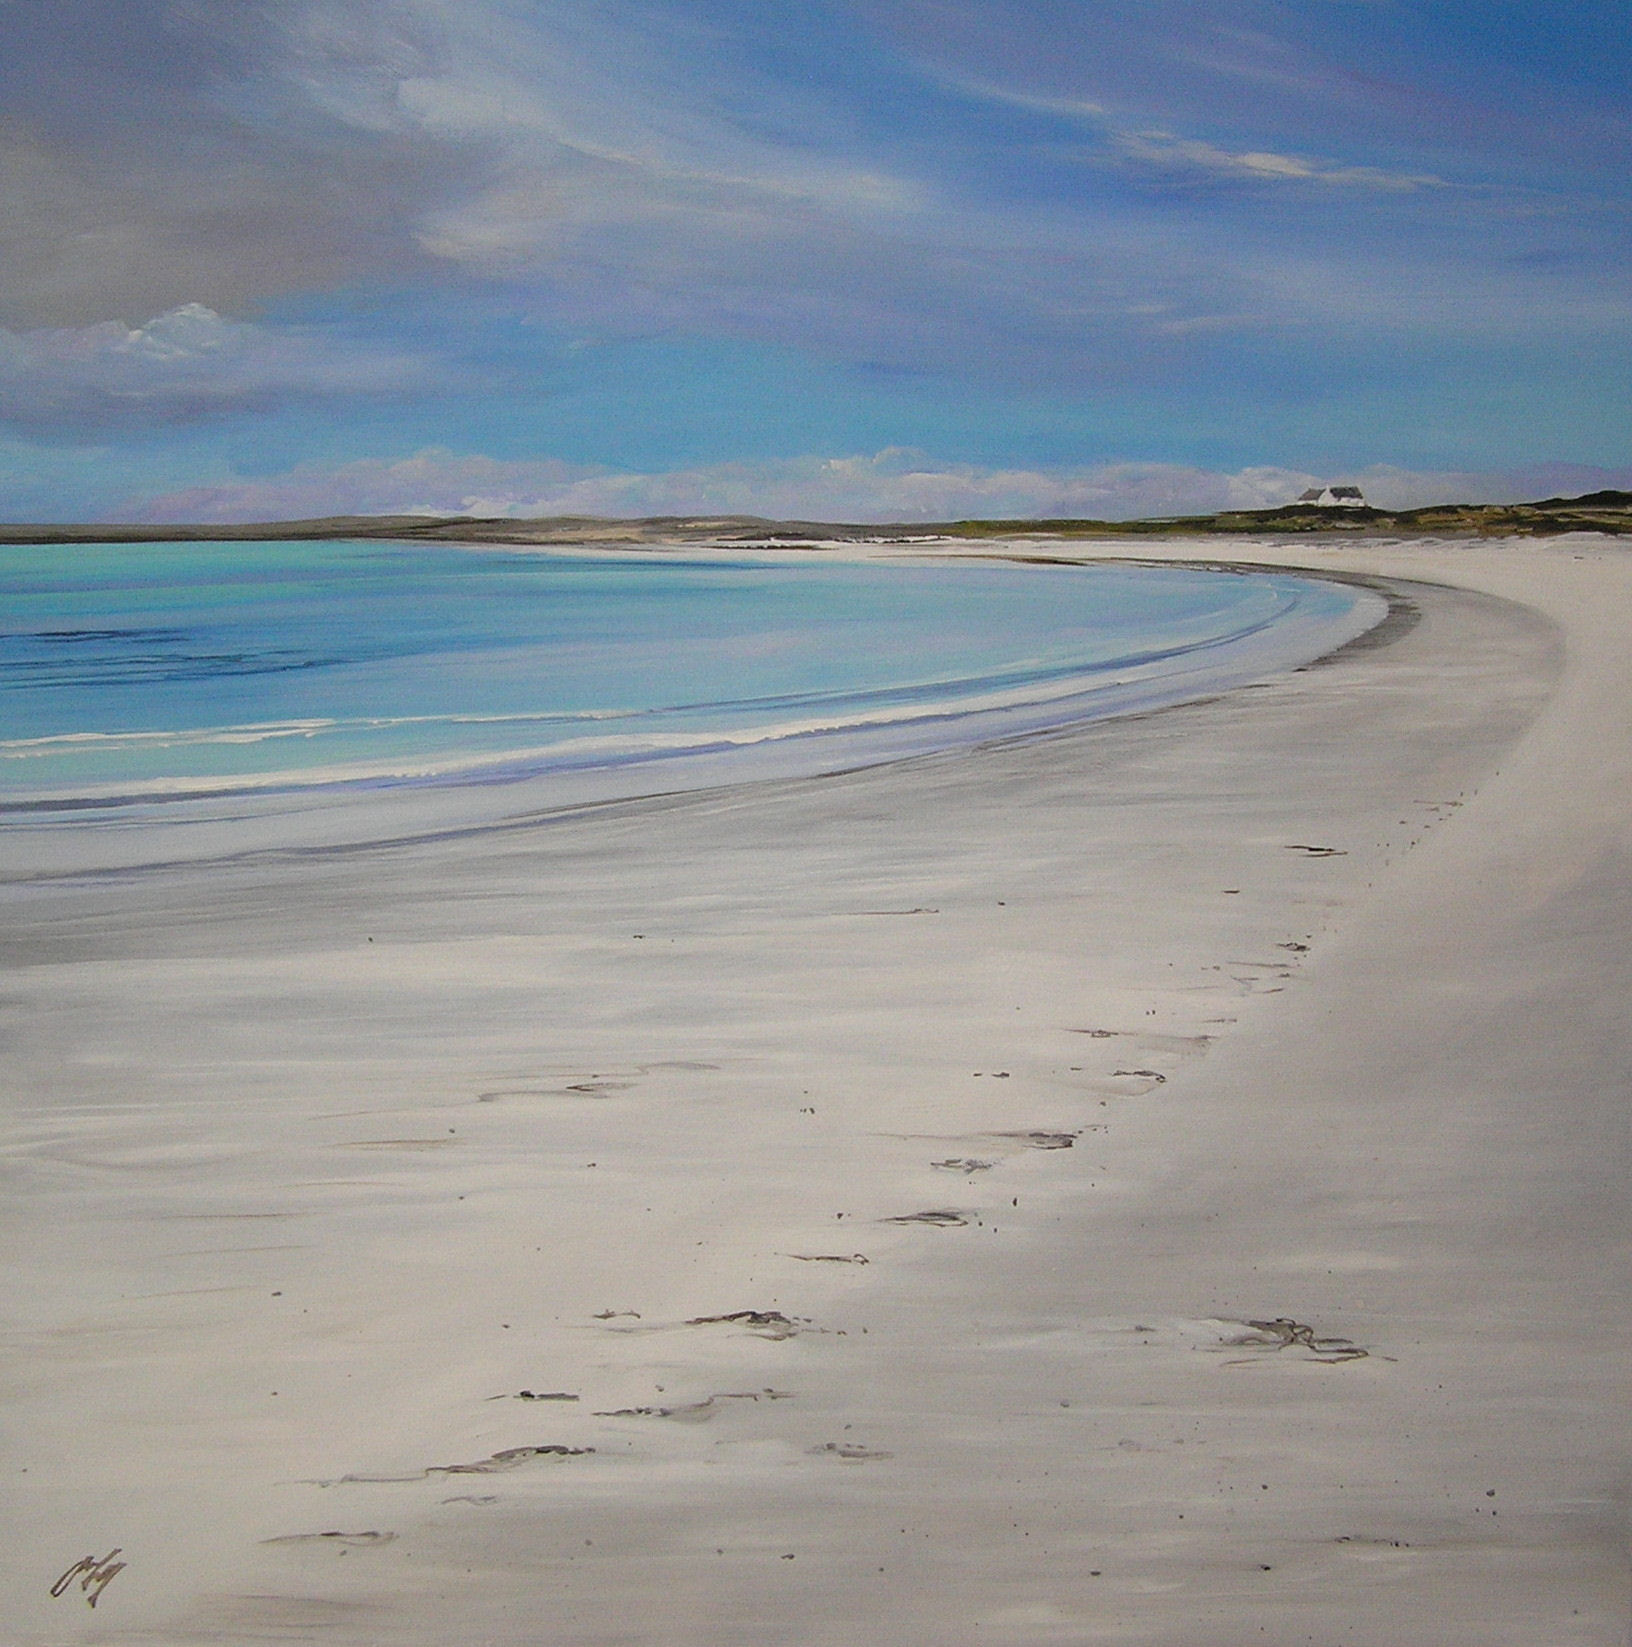 'Cottage, Salum, Tiree' by artist Allison Young